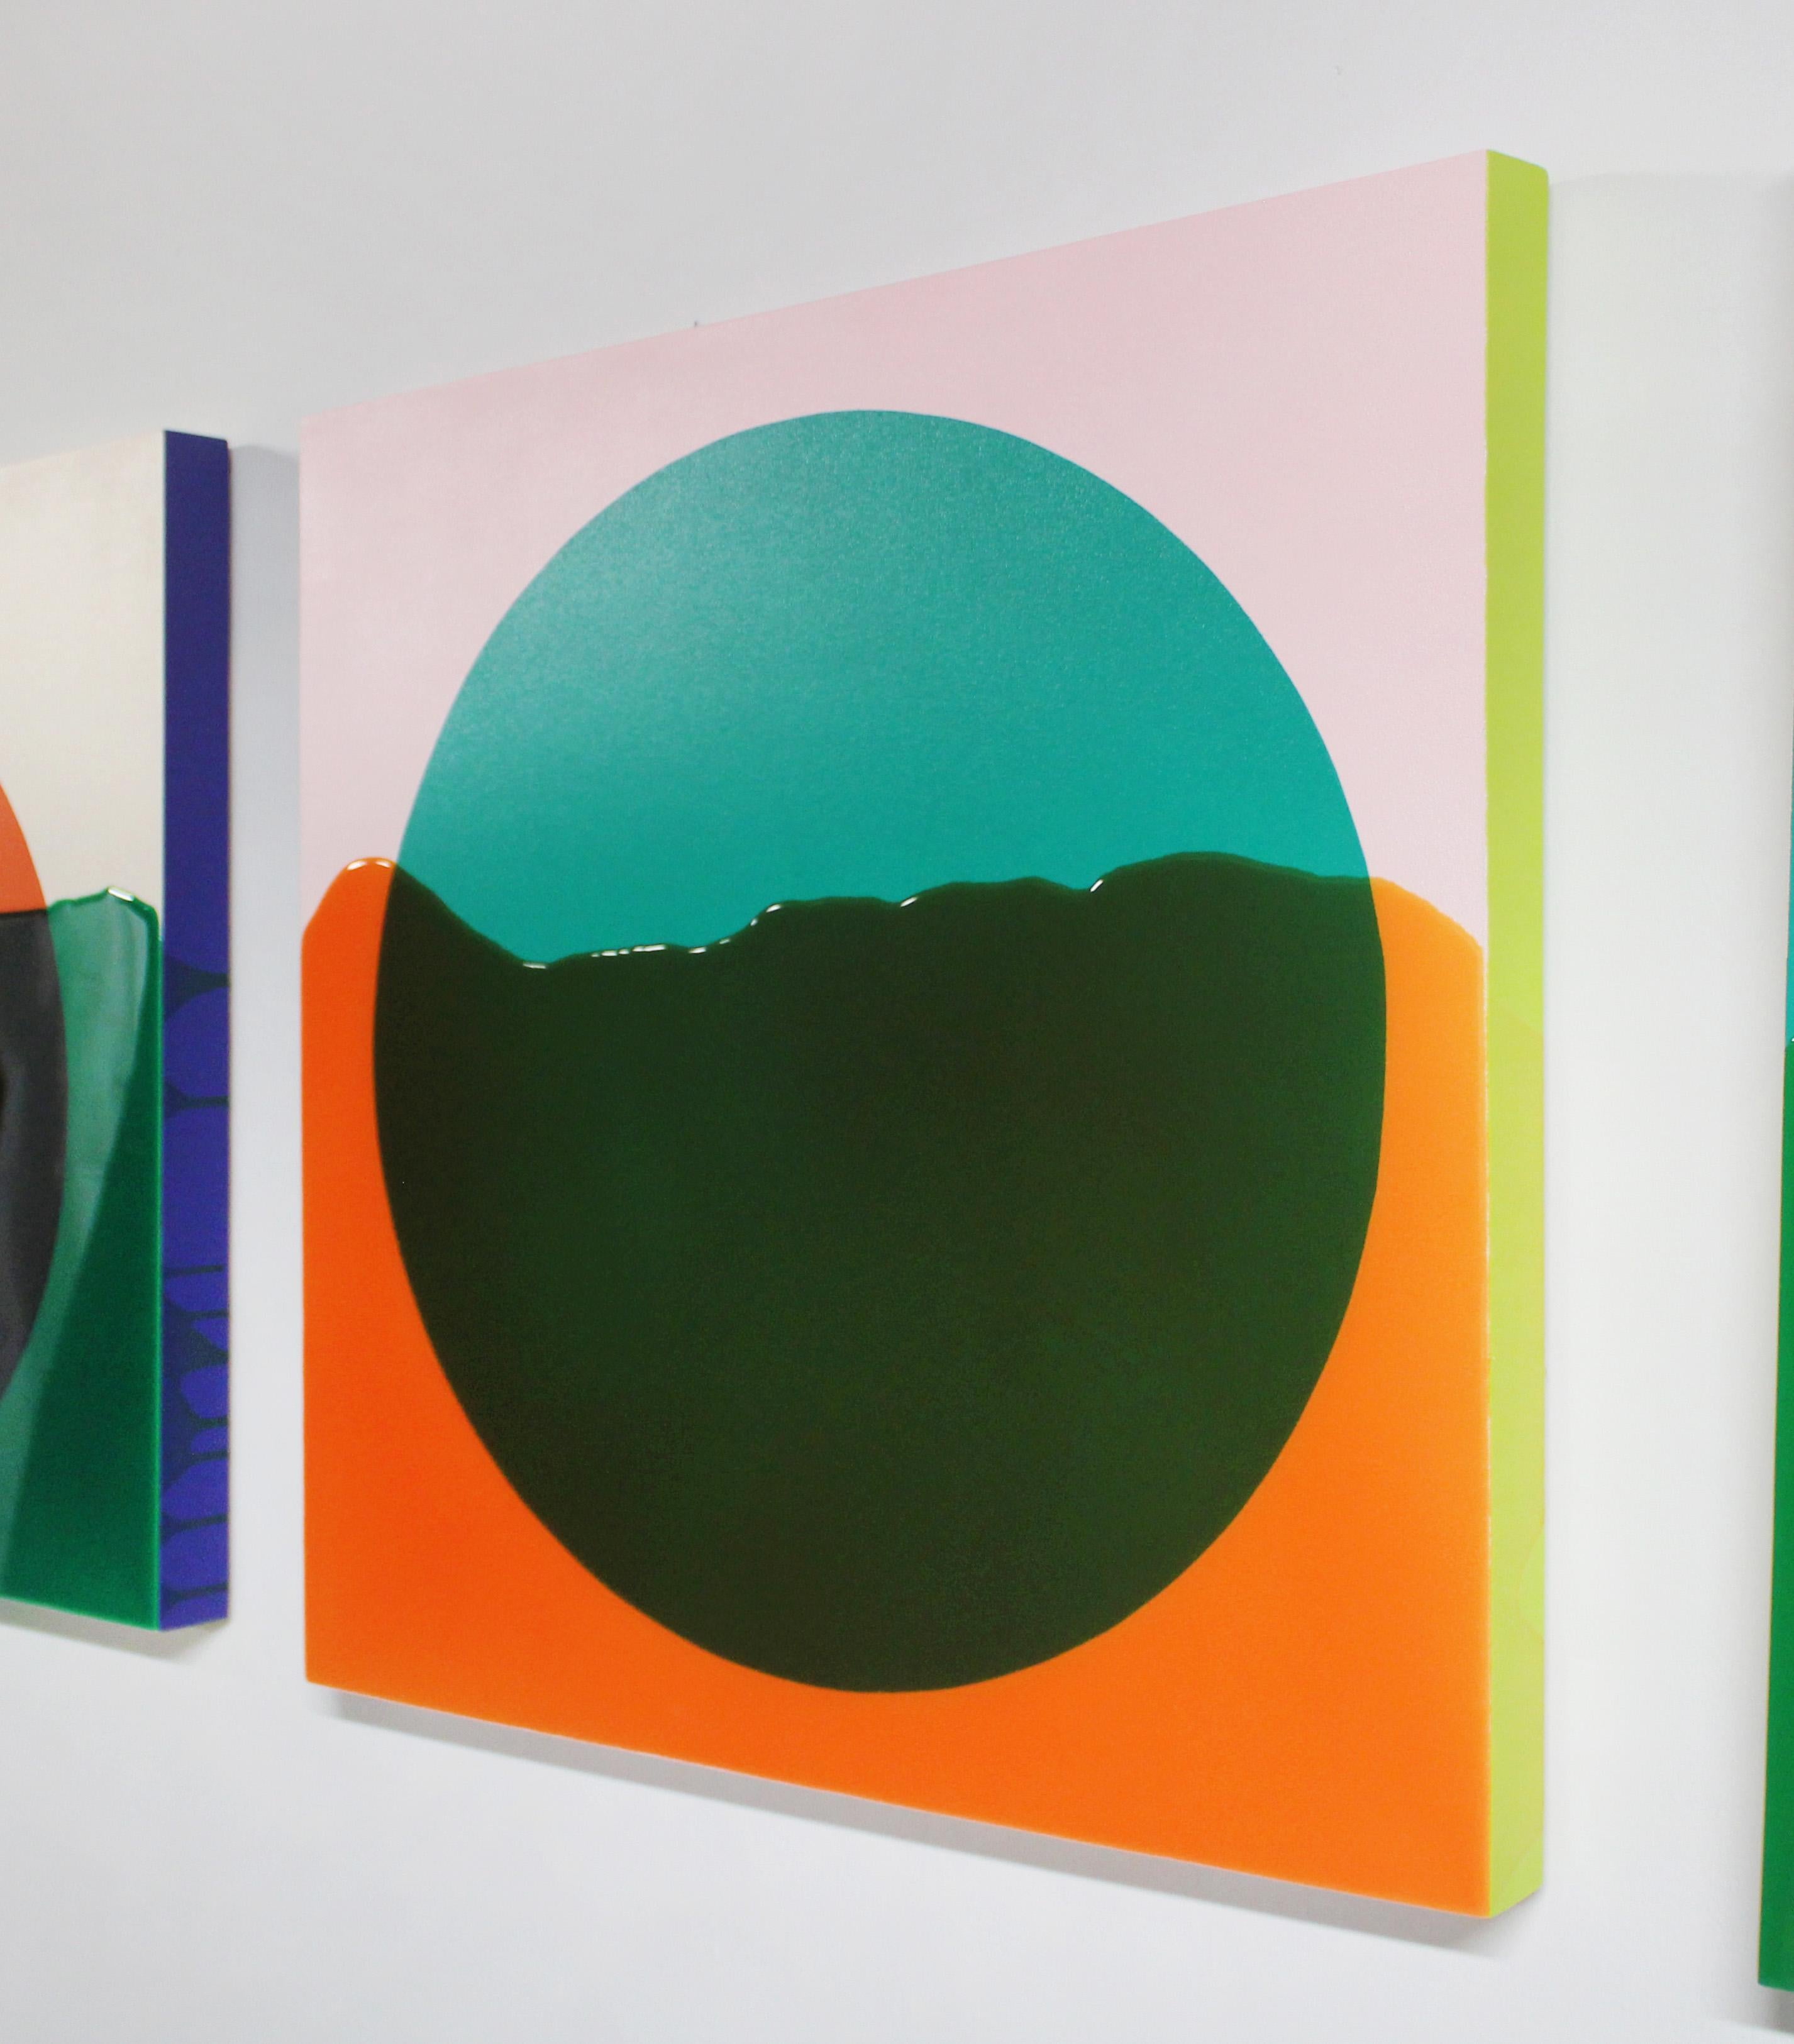 This abstract contemporary resin painting by Cameron Wilson Ritcher features a geometric style and a bright green, pink, and orange palette. A teal green circle is at the center of the composition with a light pink background. Vibrant, highly